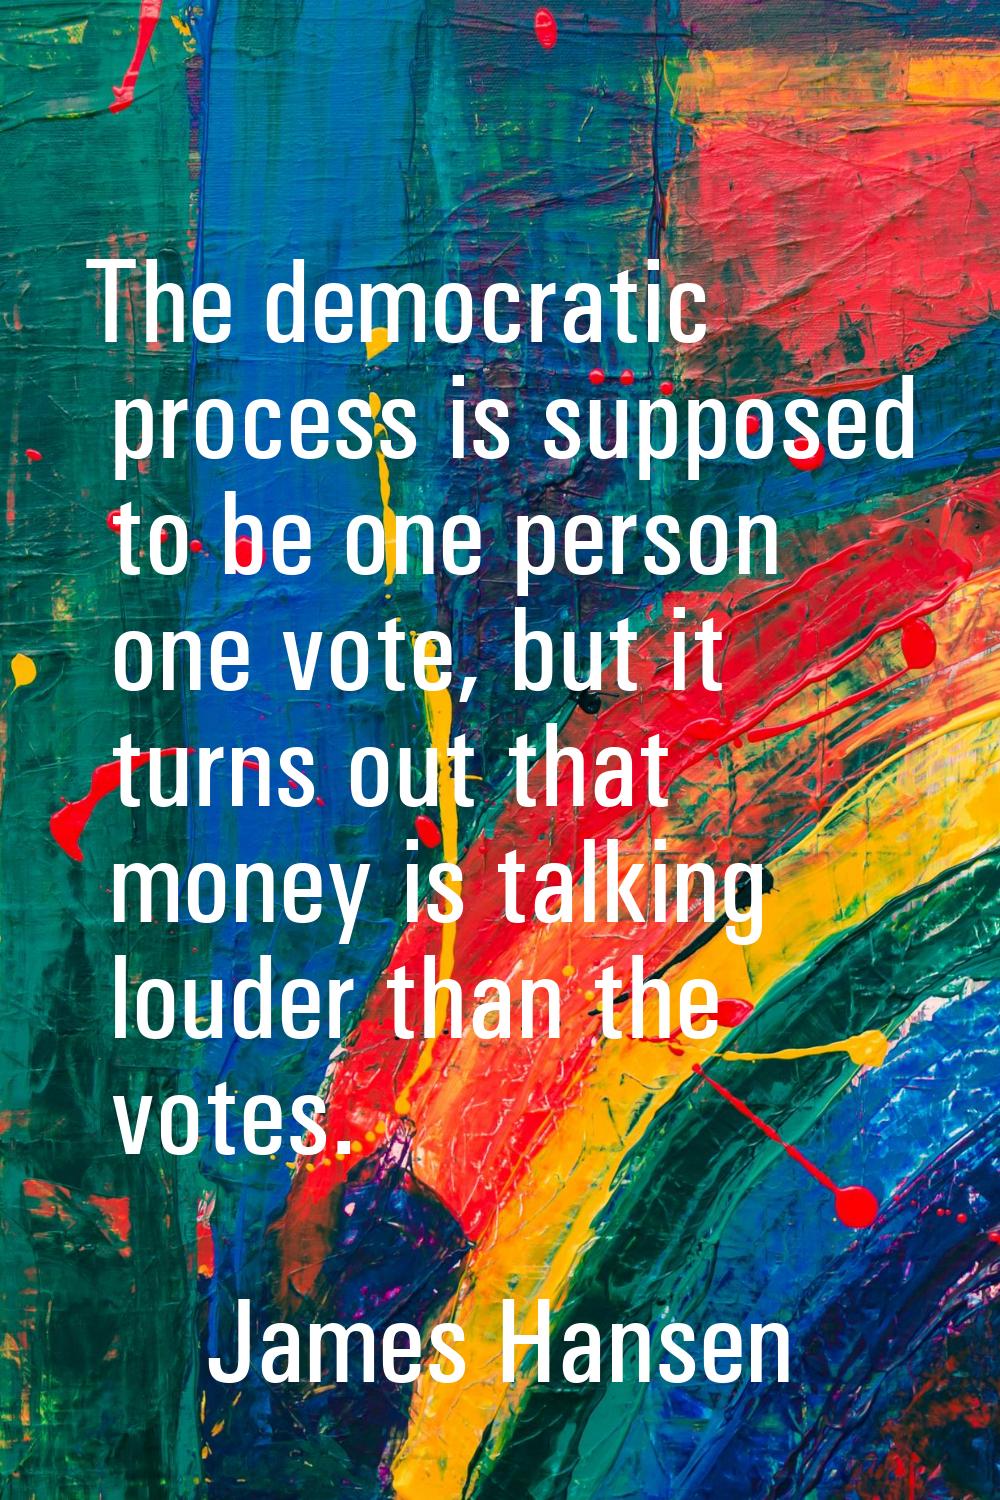 The democratic process is supposed to be one person one vote, but it turns out that money is talkin